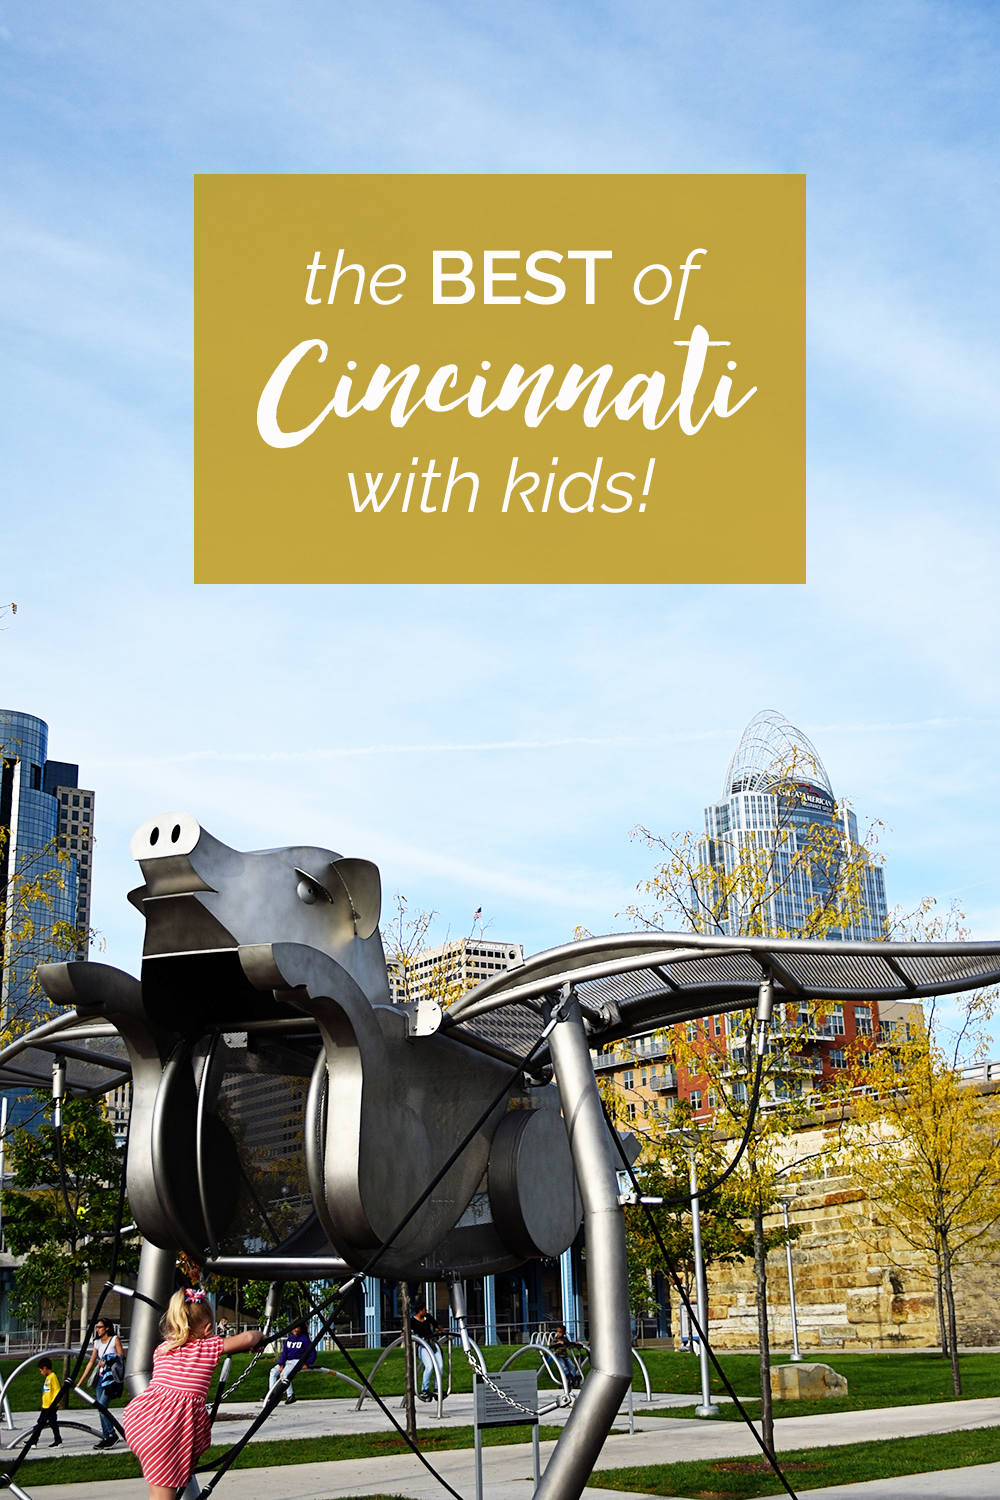 The best of Cincinnati (with kids!): There are so many family friendly places to visit in Cincinnati, Ohio. These are some of our favorites.